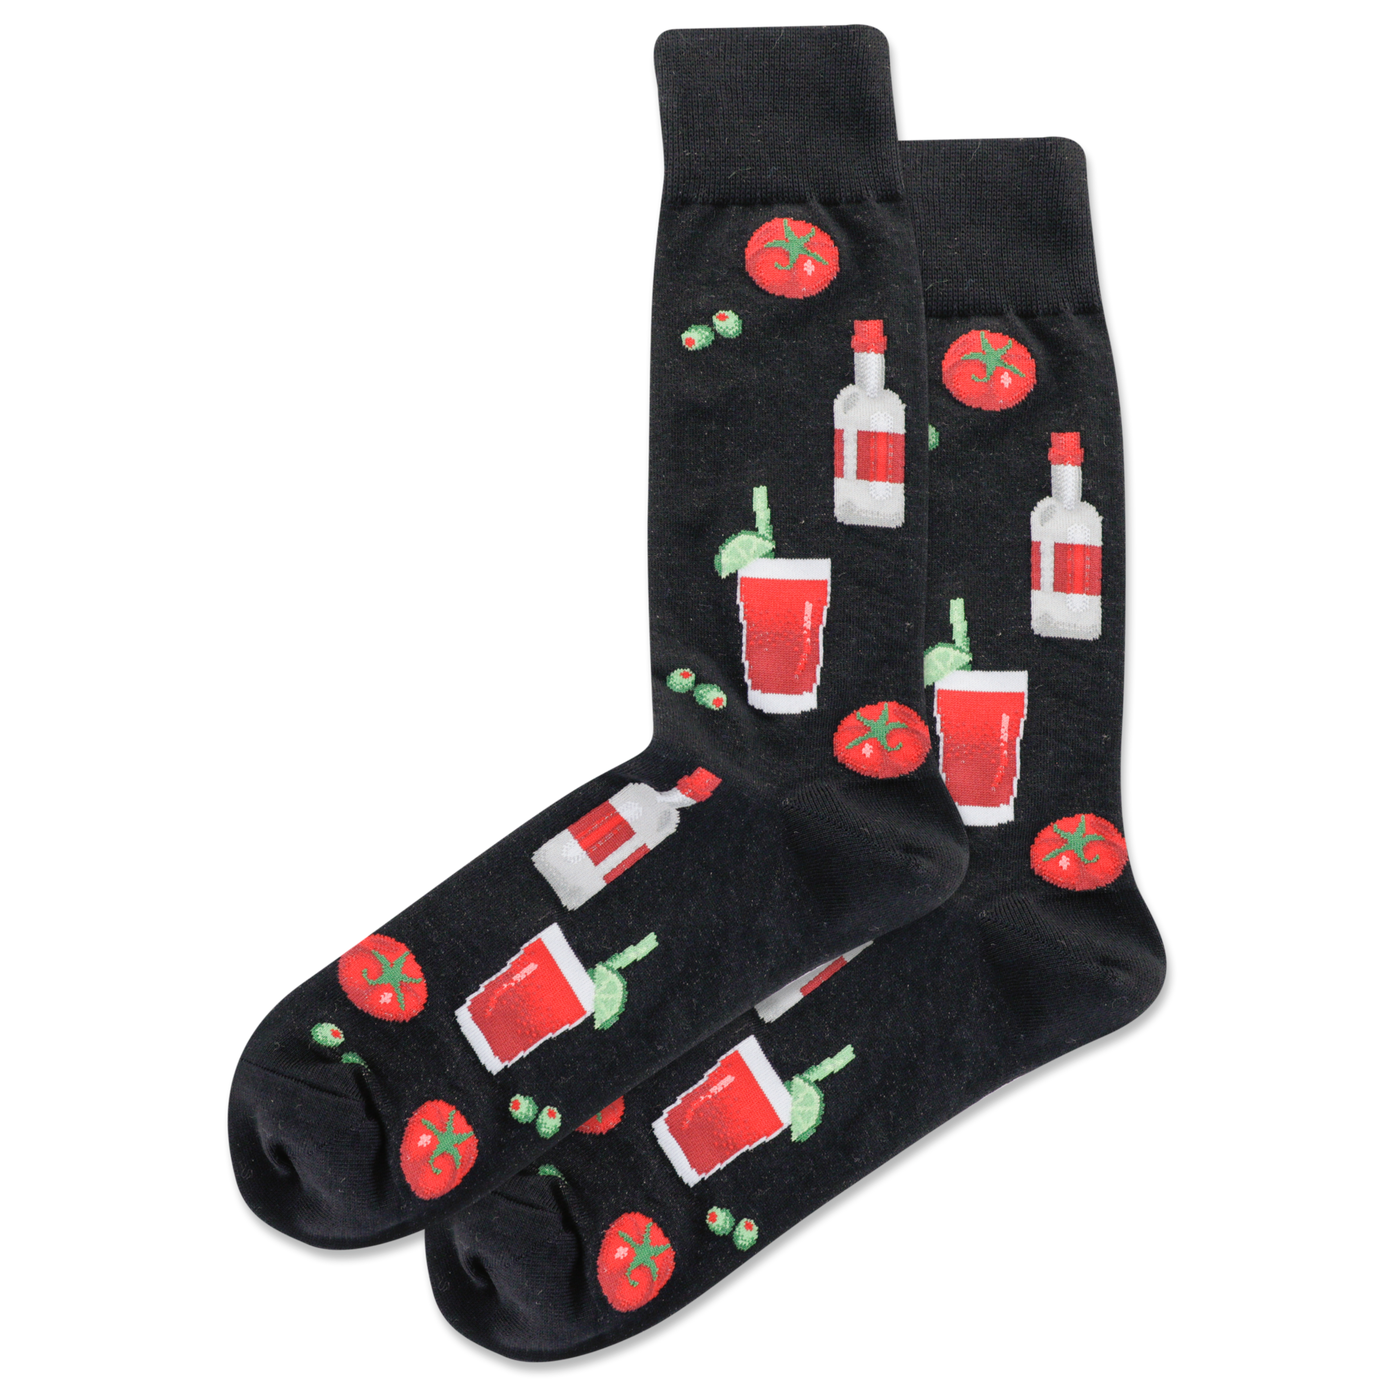 "Bloody Mary" Dress Crew Socks by Hot Sox - Large - SALE